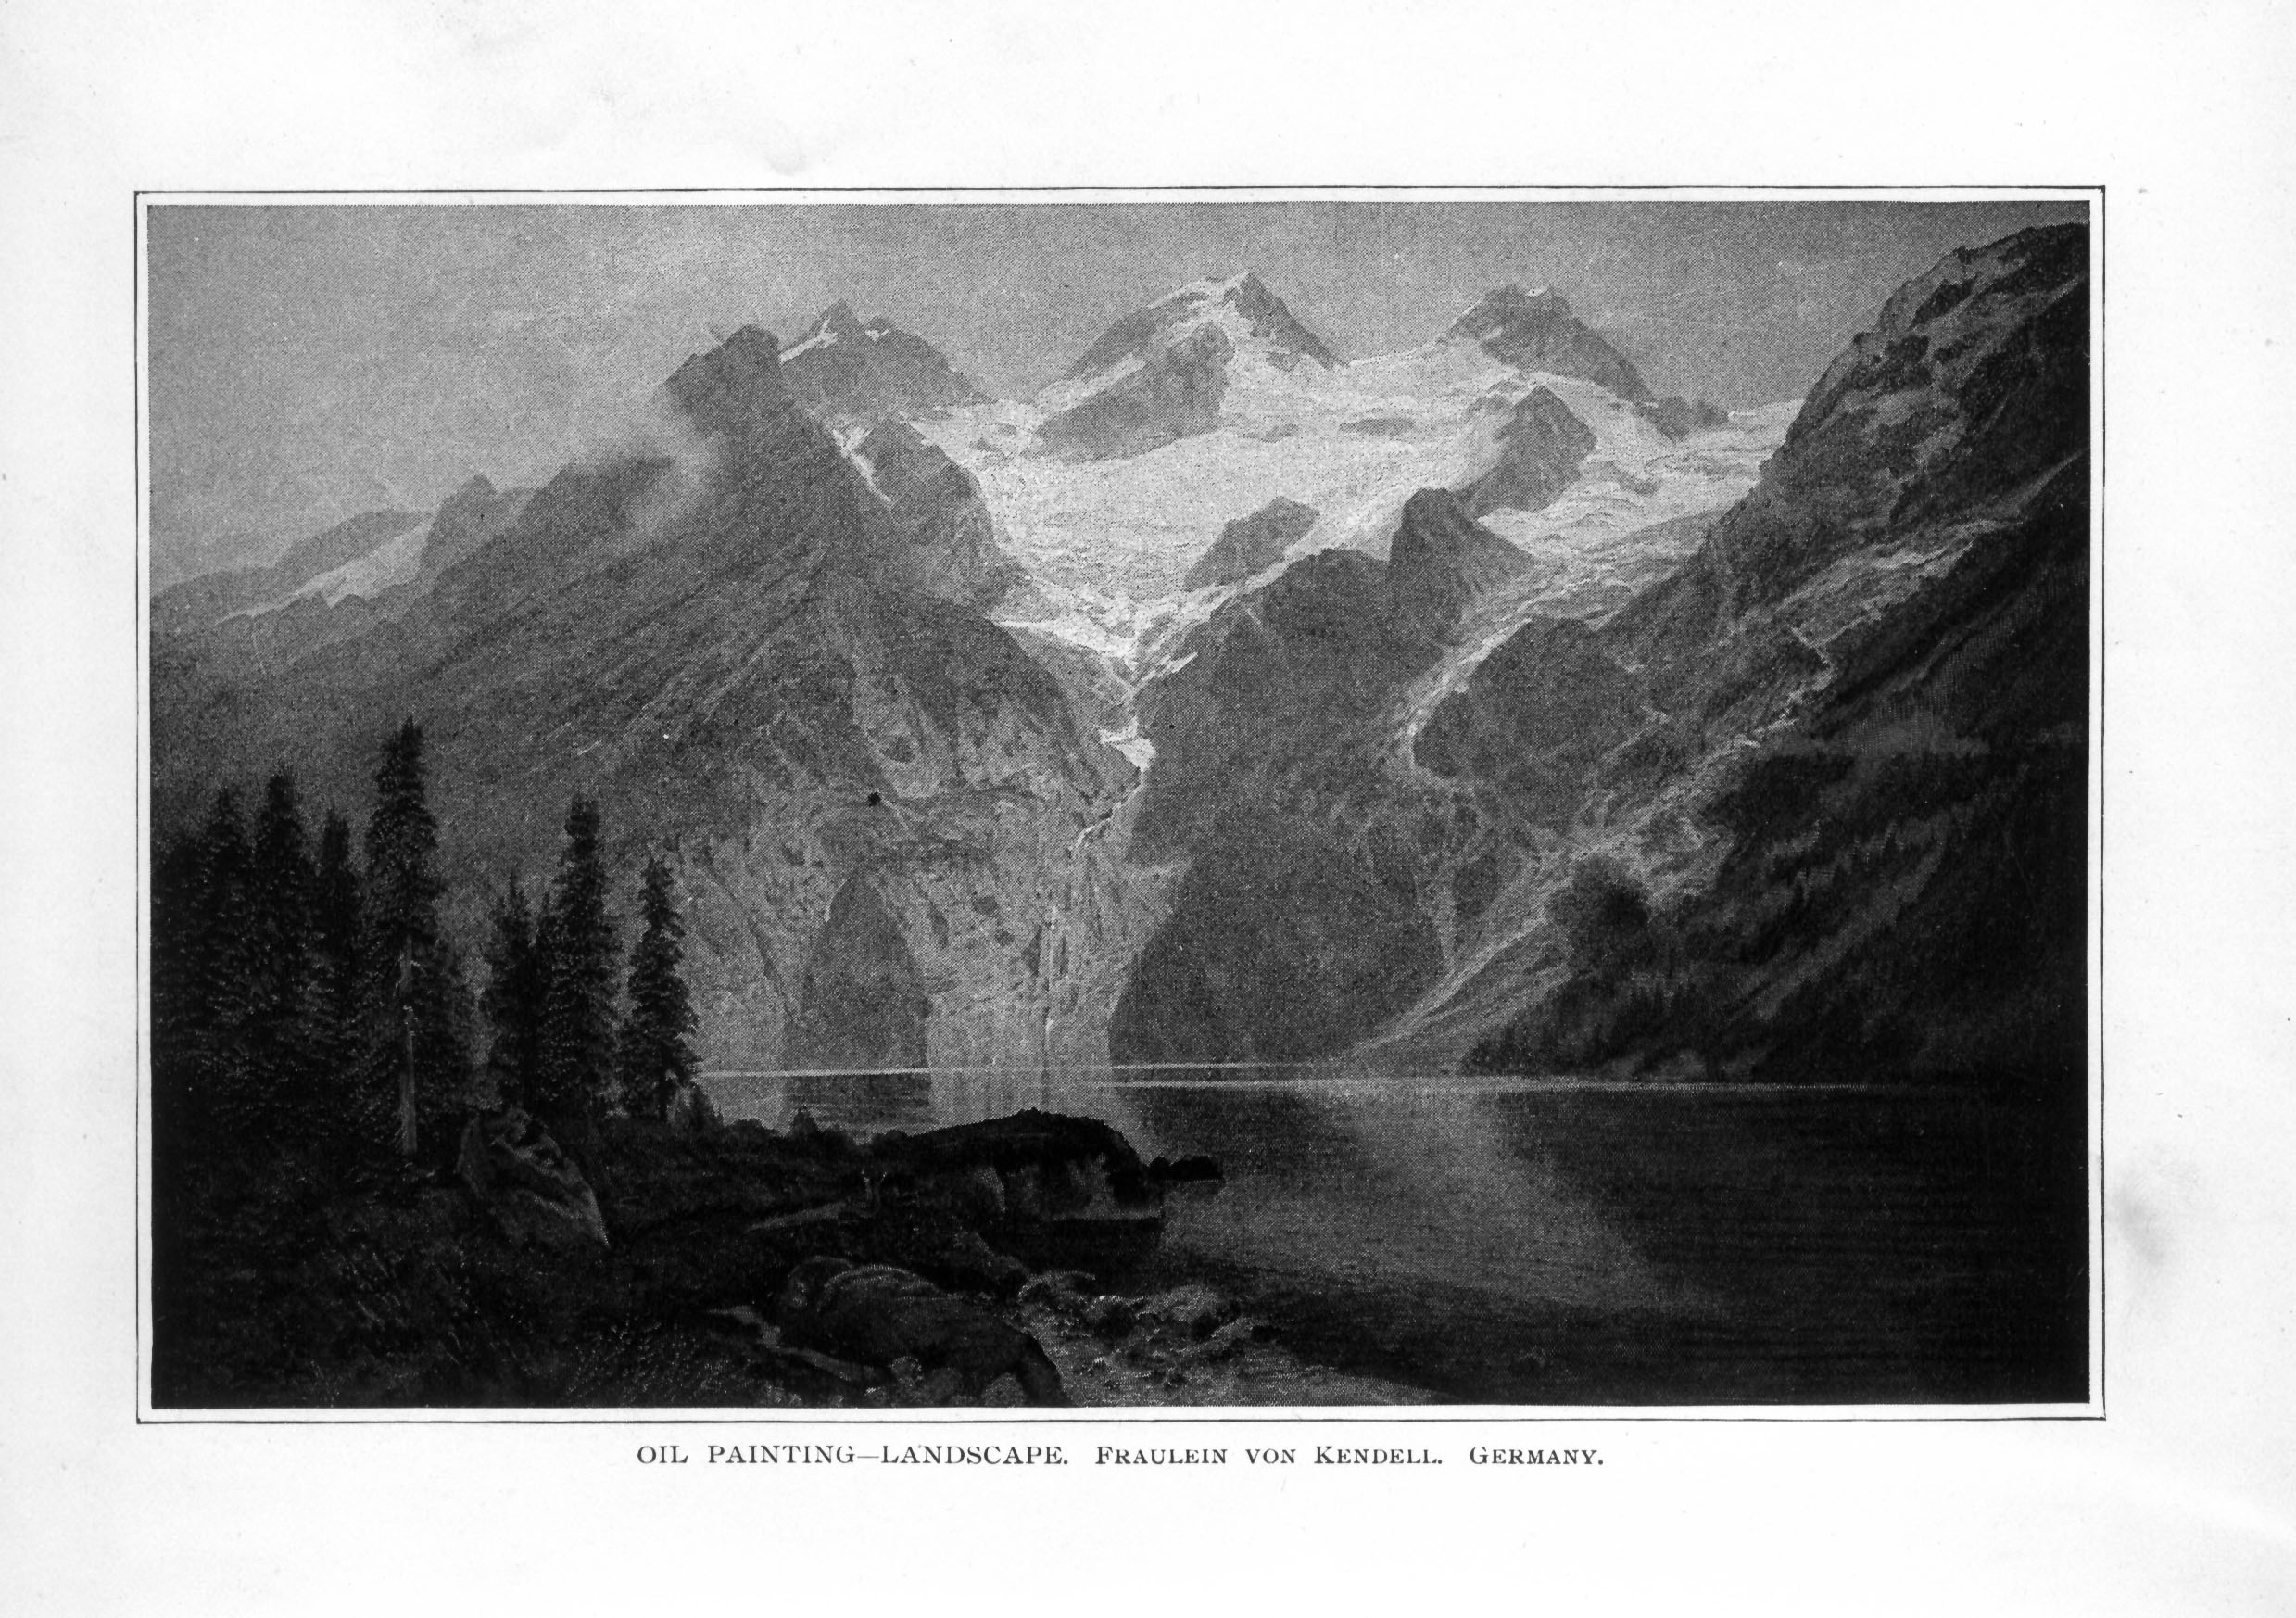 landscape with snow-capped mountains, evergreen trees, and a lake